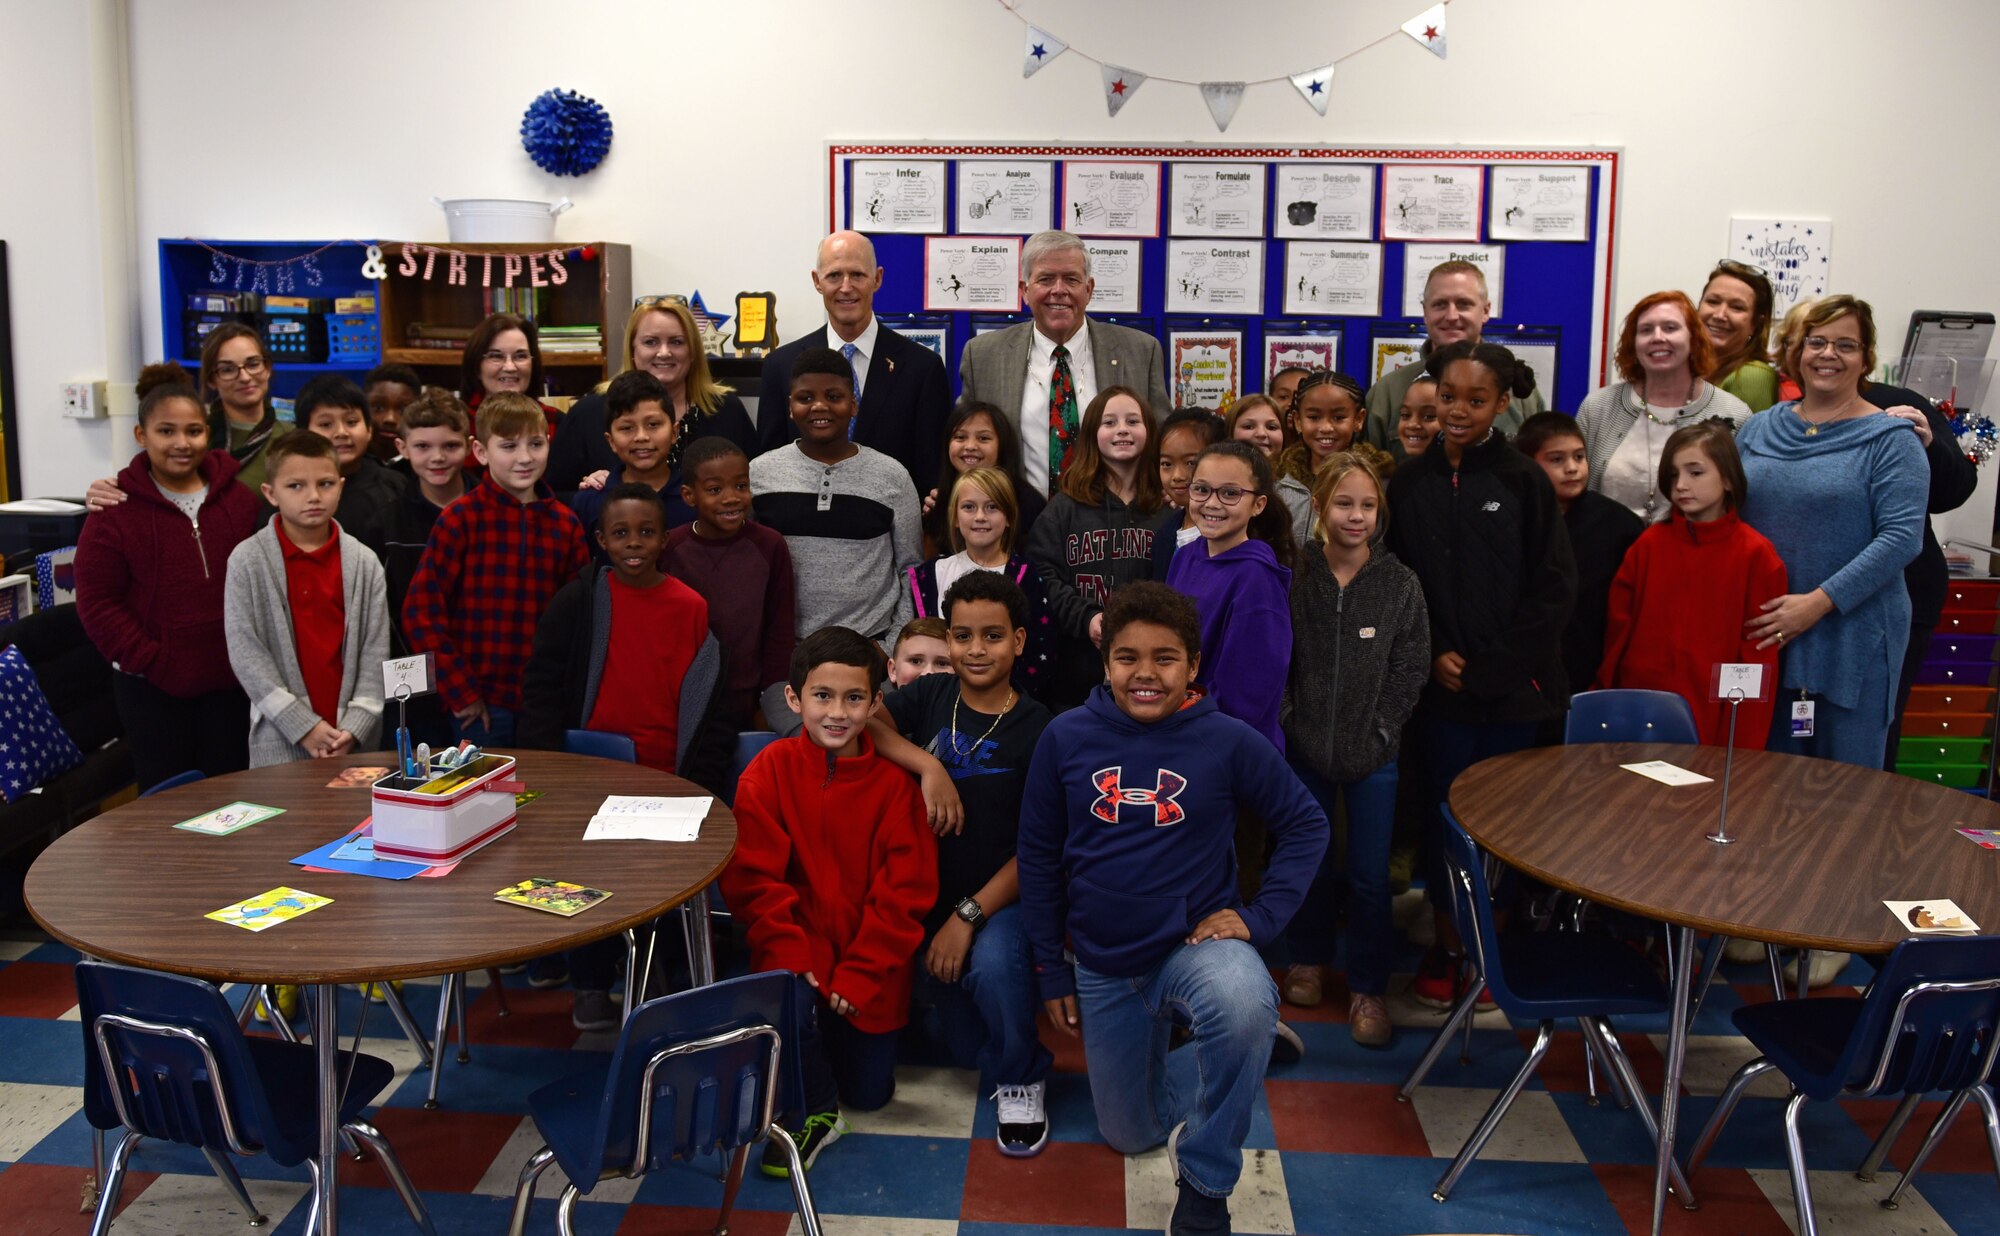 Gov. Rick Scott, current governor of Florida, and Col. Brian Laidlaw, 325th Fighter Wing commander, pose for a group photo alongside students, faculty and representatives from Bay District Schools while at the re-opening of Tyndall Elementary School near Tyndall Air Force Base, Fla., Dec. 10, 2018. The re-opening came two months after Hurricane Michael ravaged Tyndall and the surrounding Florida panhandle. (U.S. Air Force photo by Senior Airman Isaiah J. Soliz)